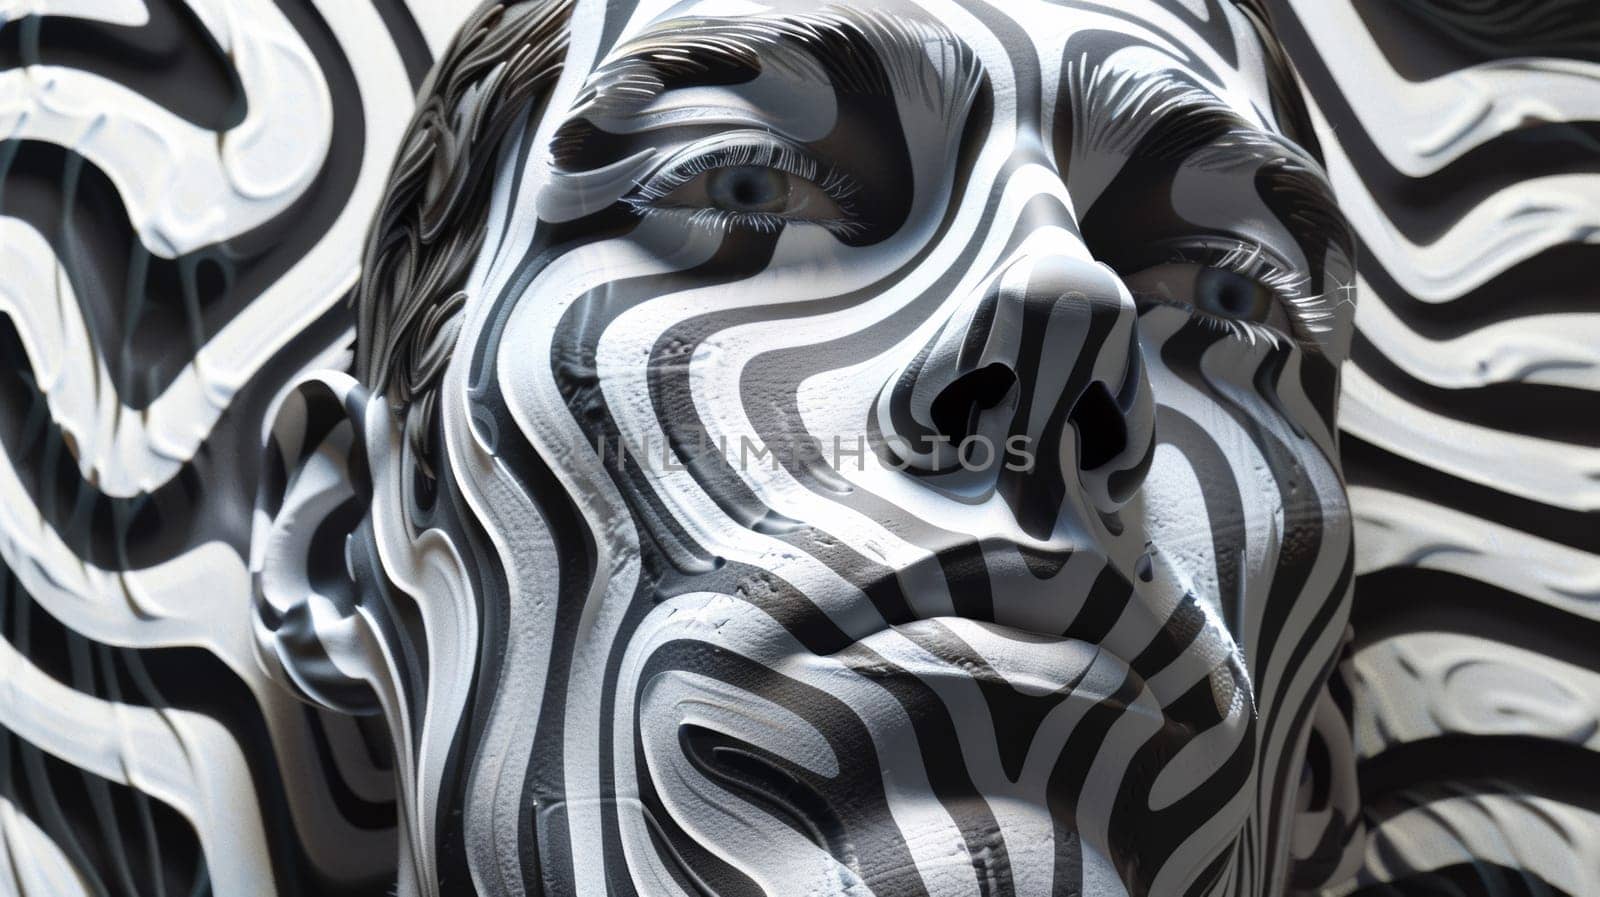 A close up of a man's face painted in zebra stripes